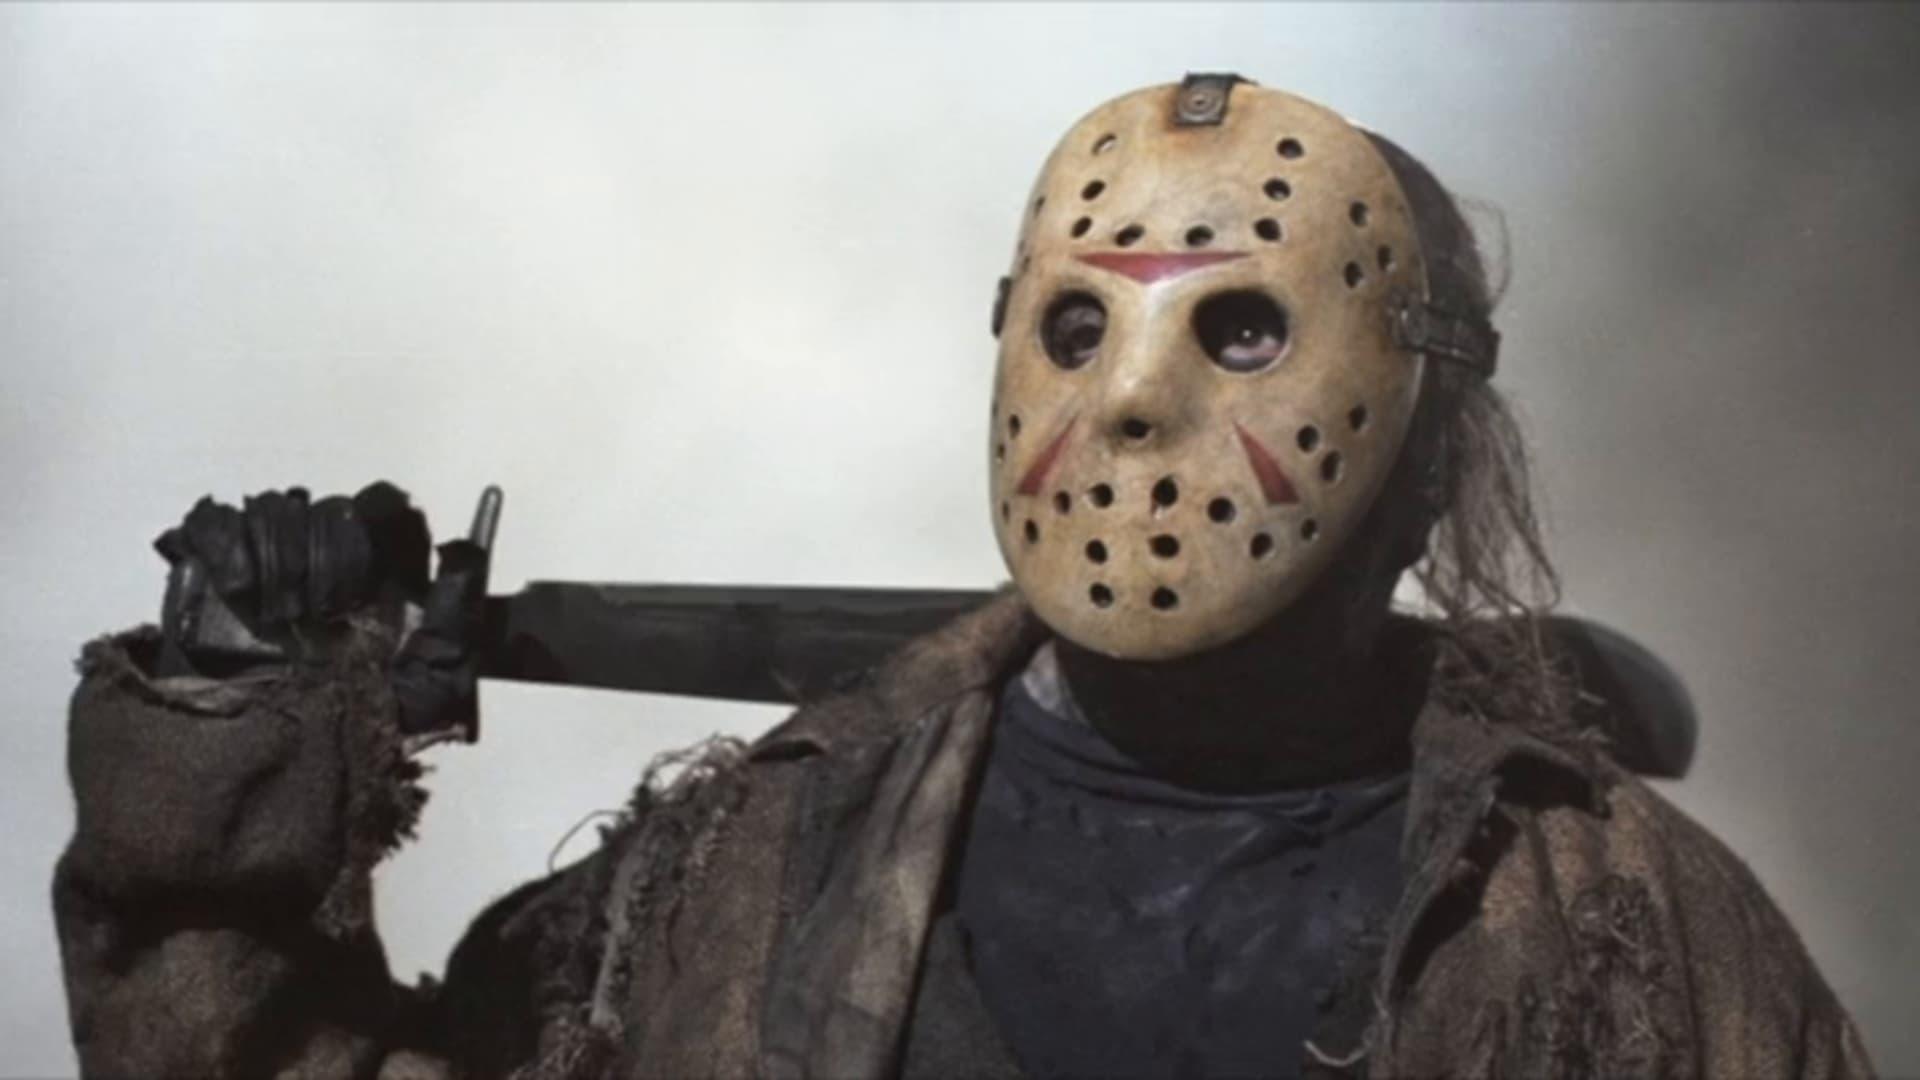 His Name Was Jason: 30 Years of Friday the 13th backdrop